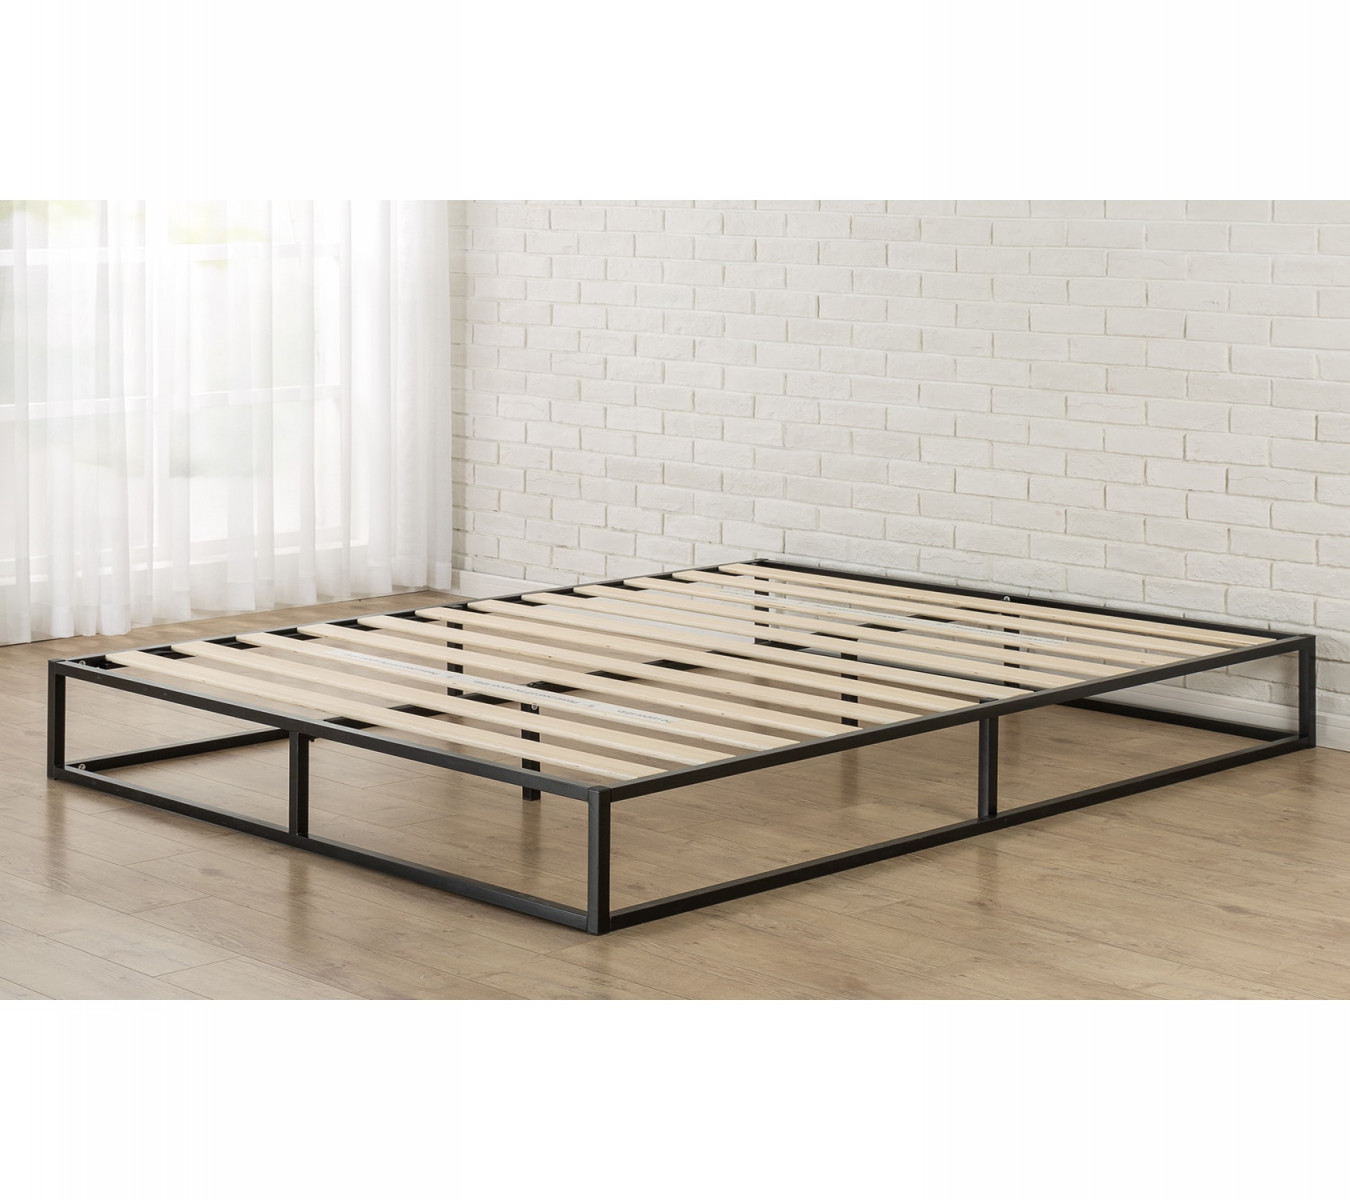 Priage by Zinus Platforma Metal -inch Queen-size Bed Frame